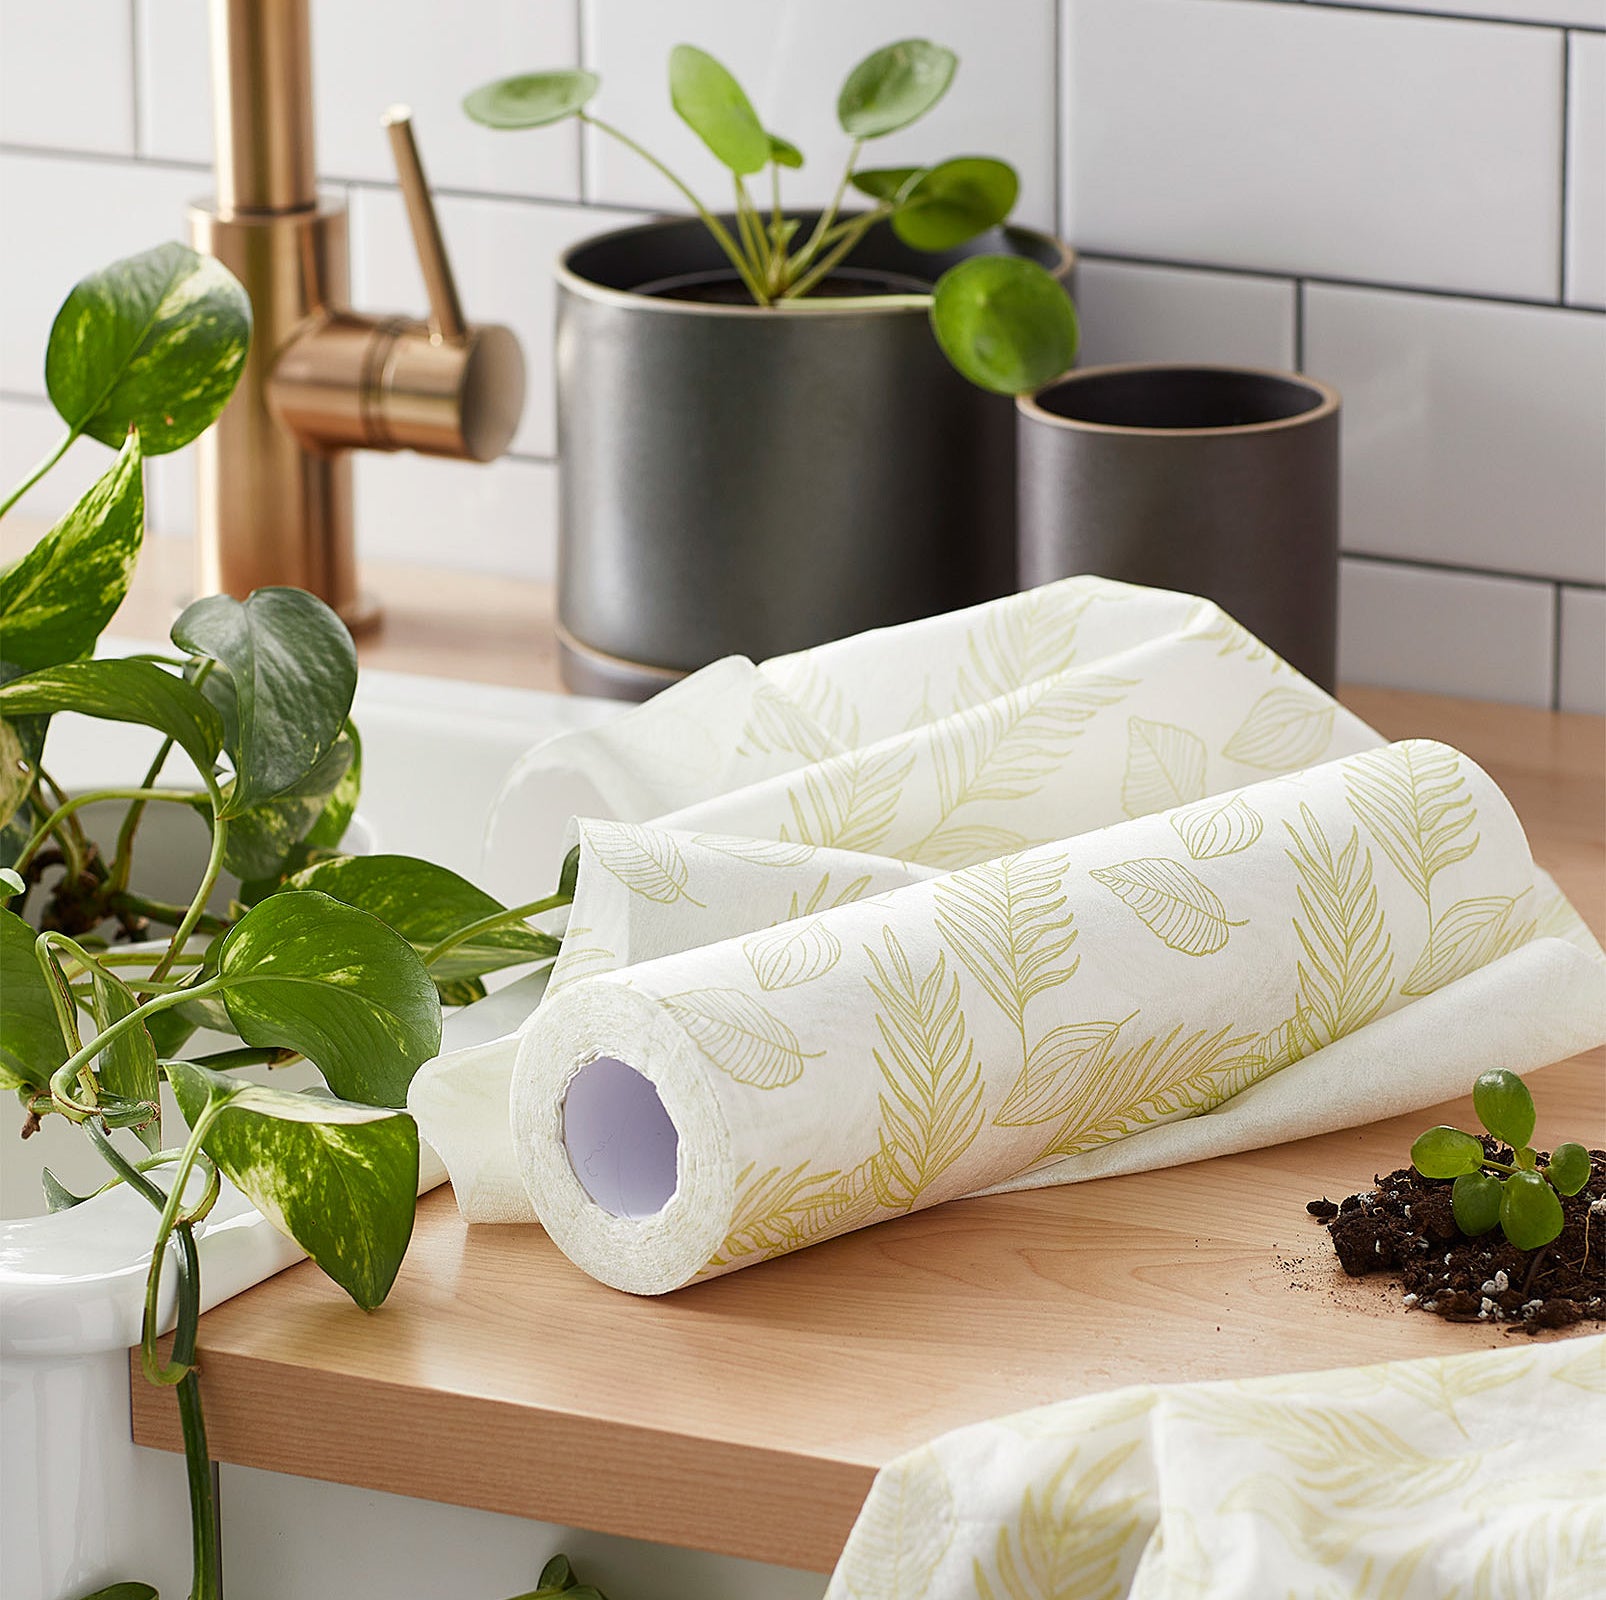 A roll of bamboo paper towels on a kitchen counter